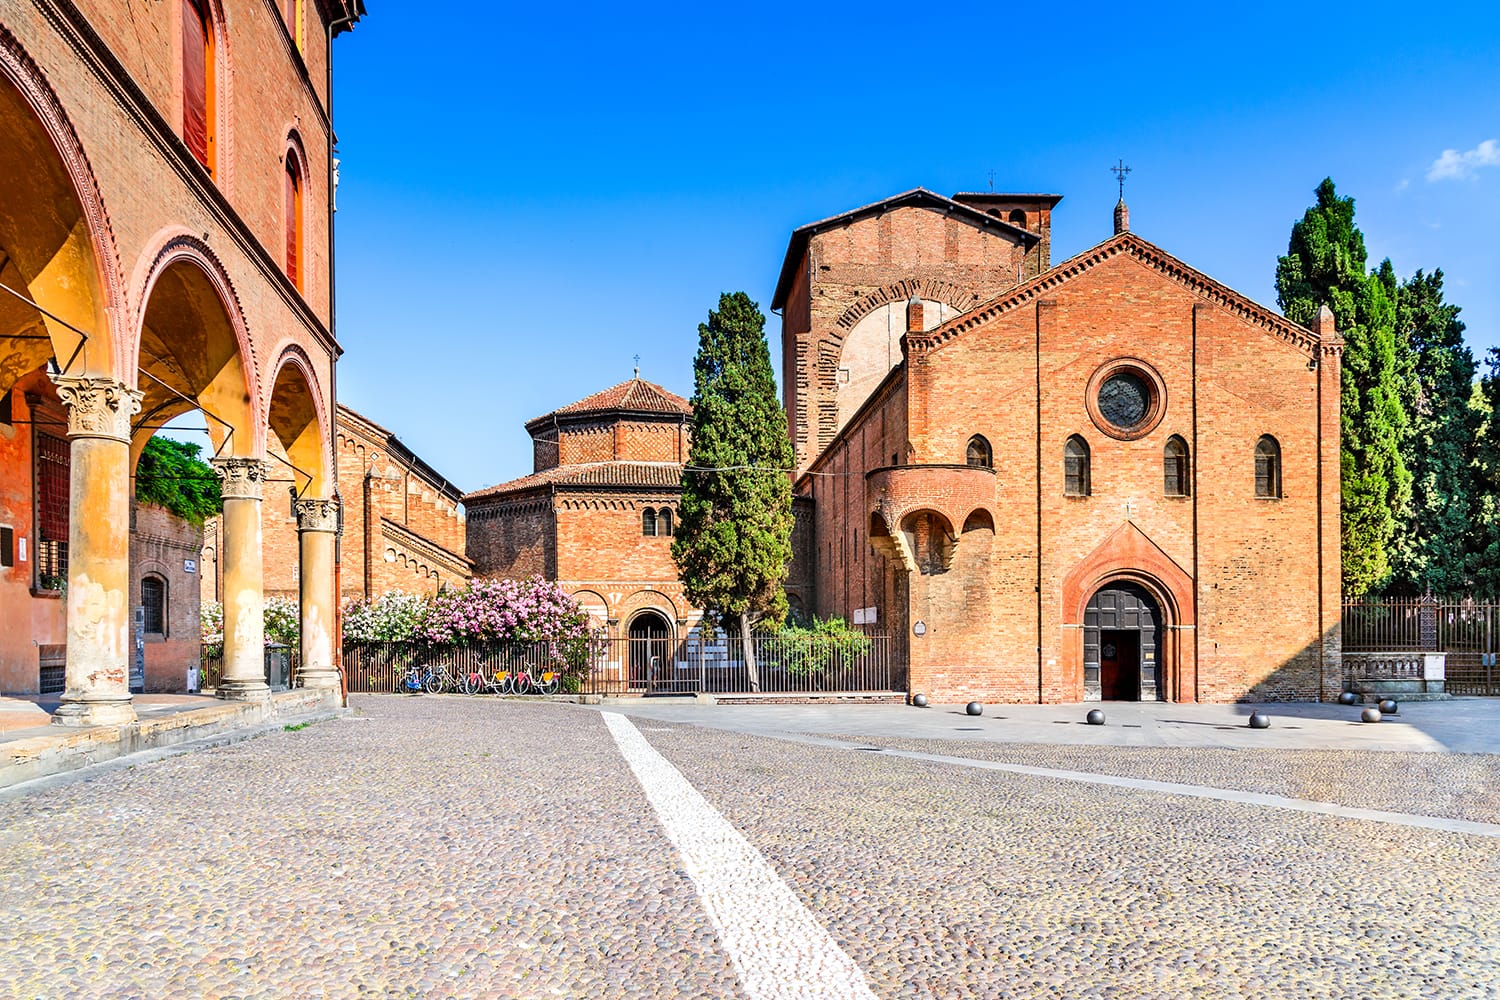 The basilica of Santo Stefano, Holy Jerusalem, known as Seven Churches in Bologna, Italy